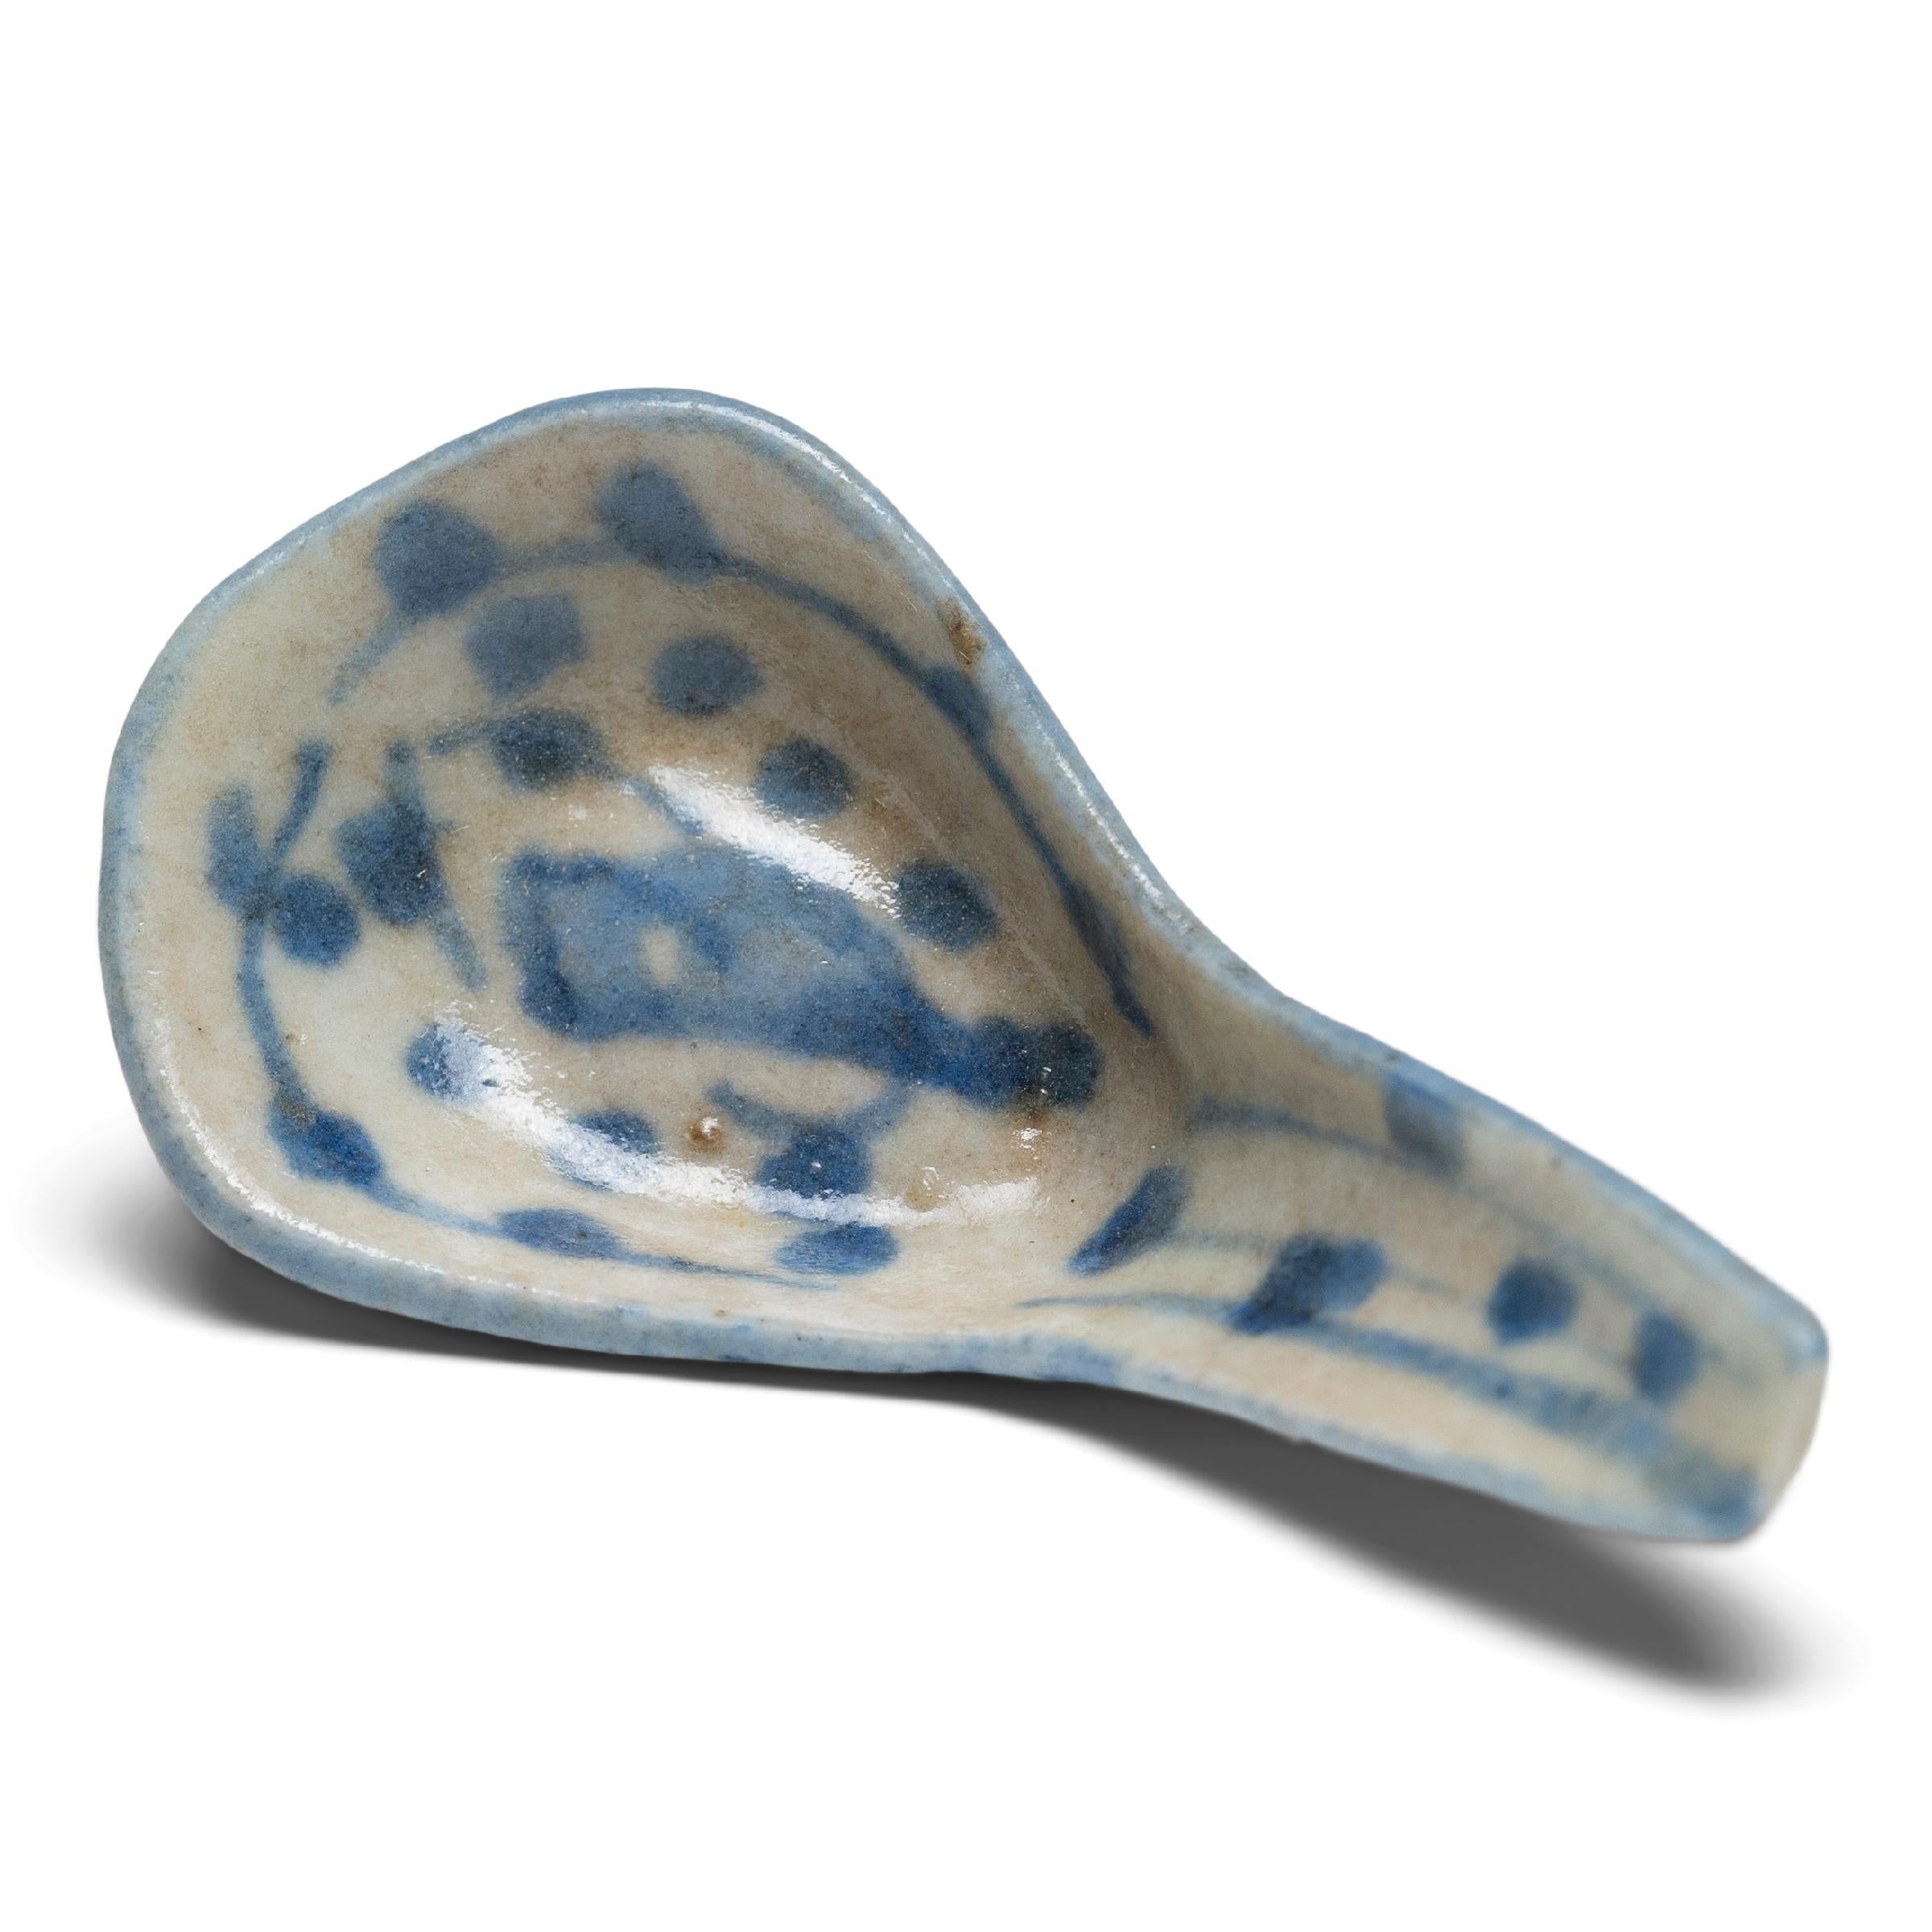 A delicate example of the time-honored practice of blue-and-white ceramics, this 19th-century porcelain soup spoon was likely used as an everyday eating utensil. Used in China as early as the Shang dynasty (1600 - 1046 B.C.), spoons predated